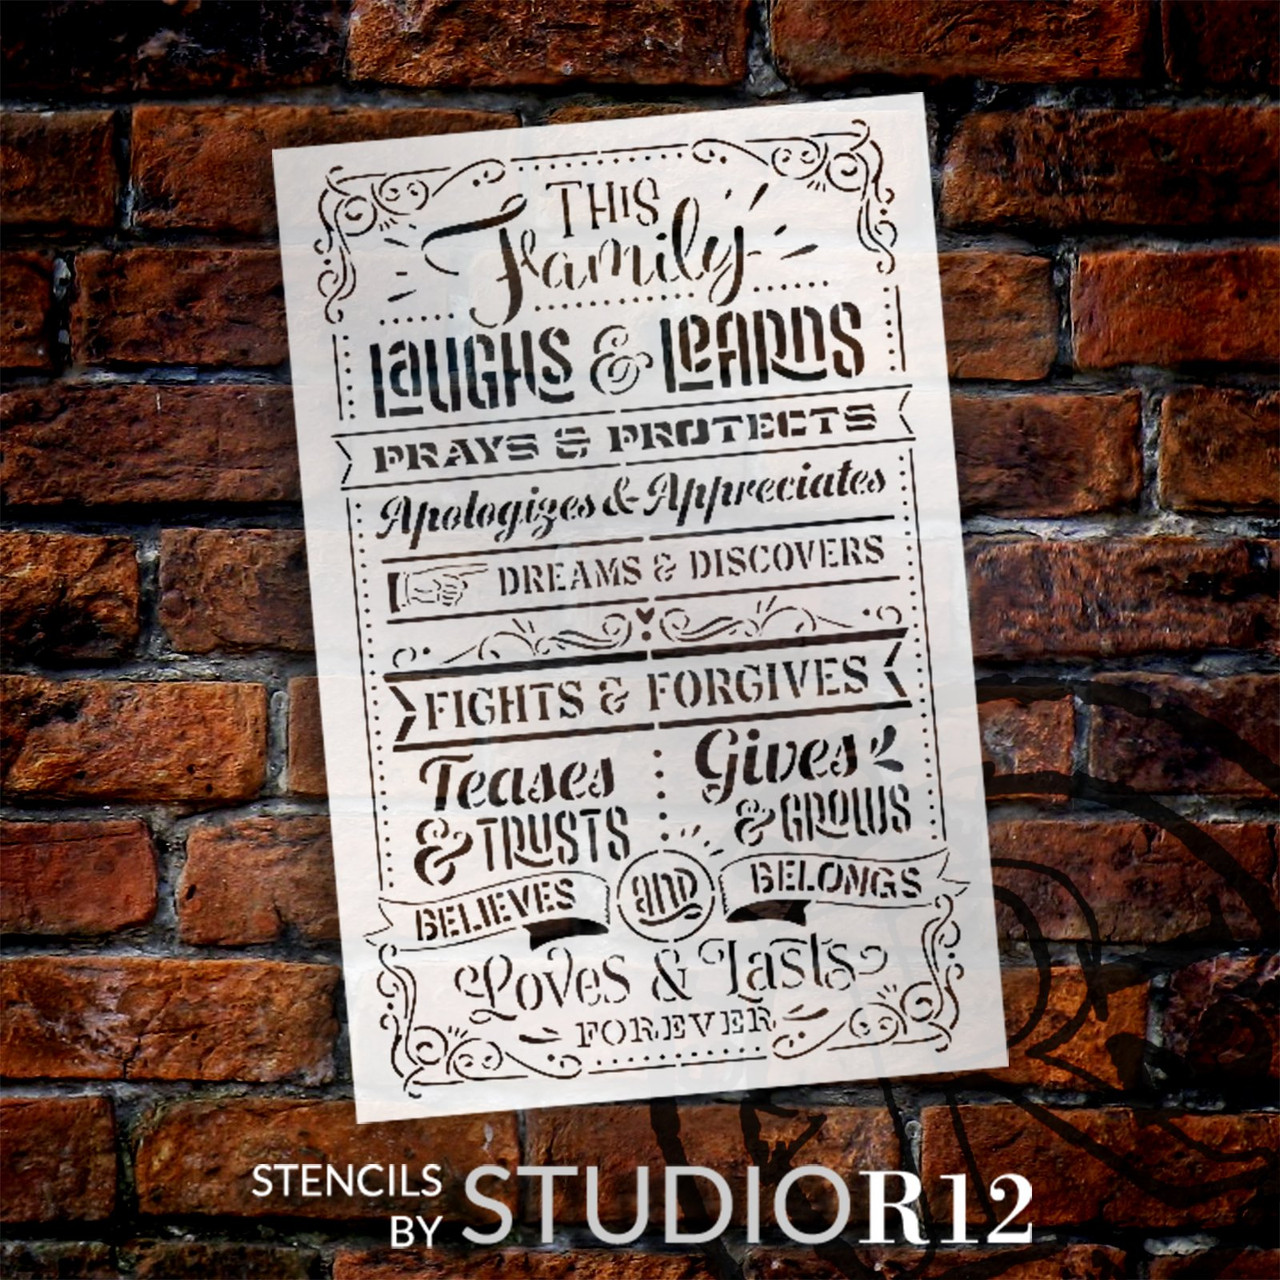 This Family Laughs & Learns House Rules Stencil by StudioR12 - Select Size - USA Made - Craft DIY Farmhouse Living Room Home Decor | Paint Wood Sign